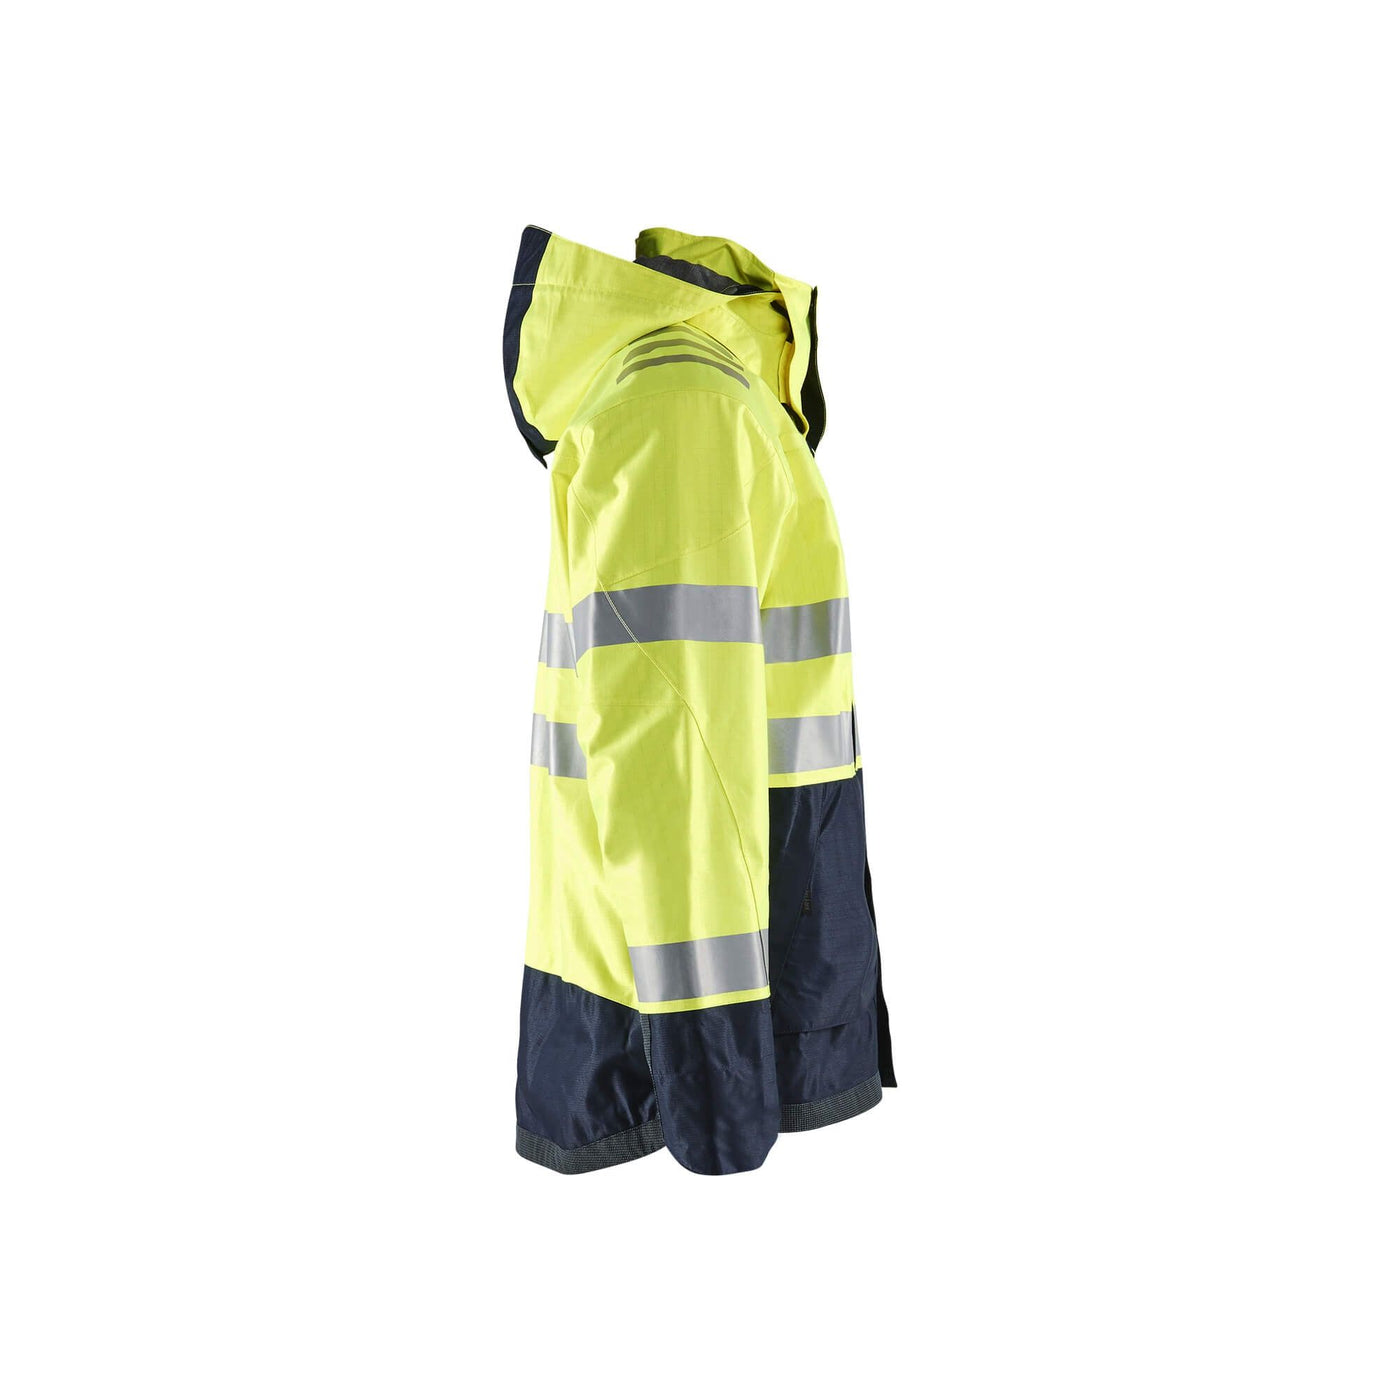 Blaklader 40881532 Hi-Vis Waterproof Shell Jacket Multinorm Yellow/Navy Blue Right #colour_yellow-navy-blue